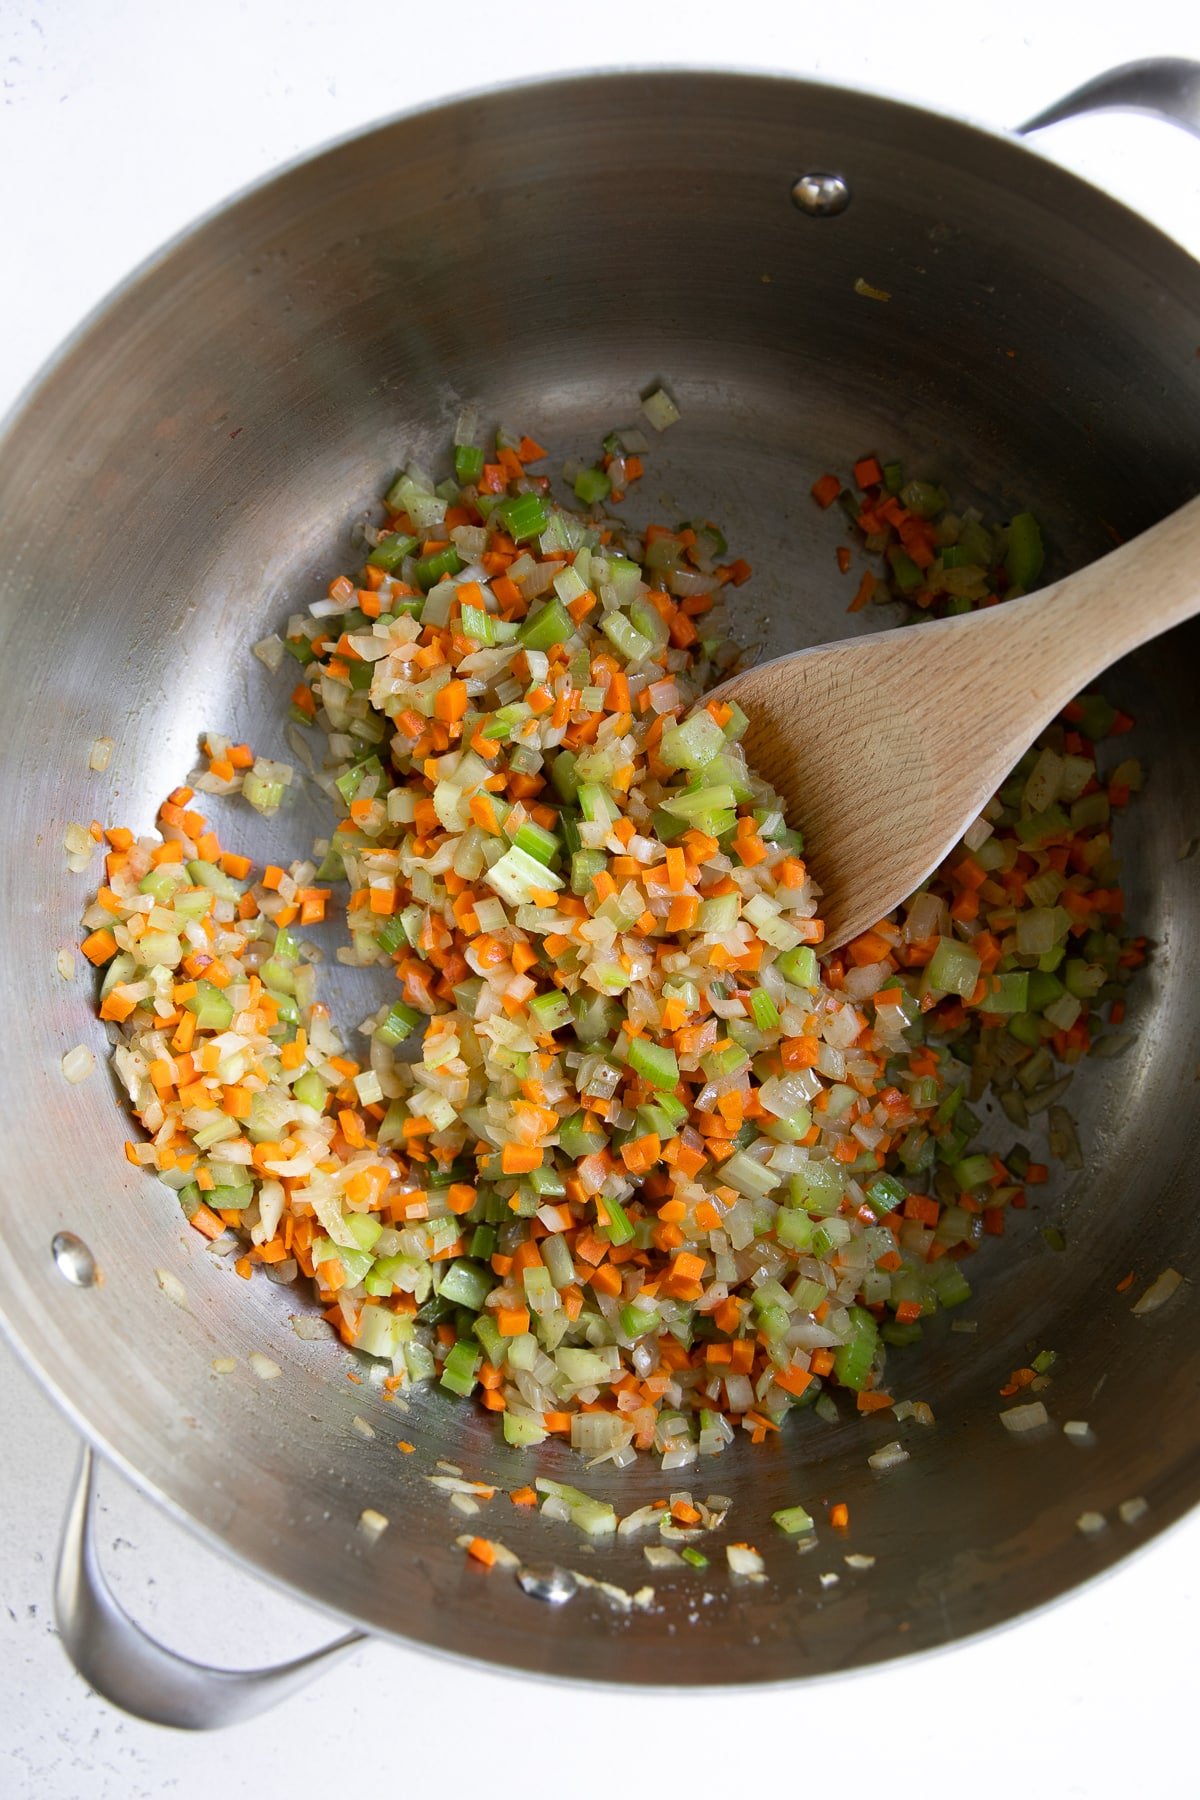 Large pot filled with finely minced onion, carrots, and celery cooking over low heat.